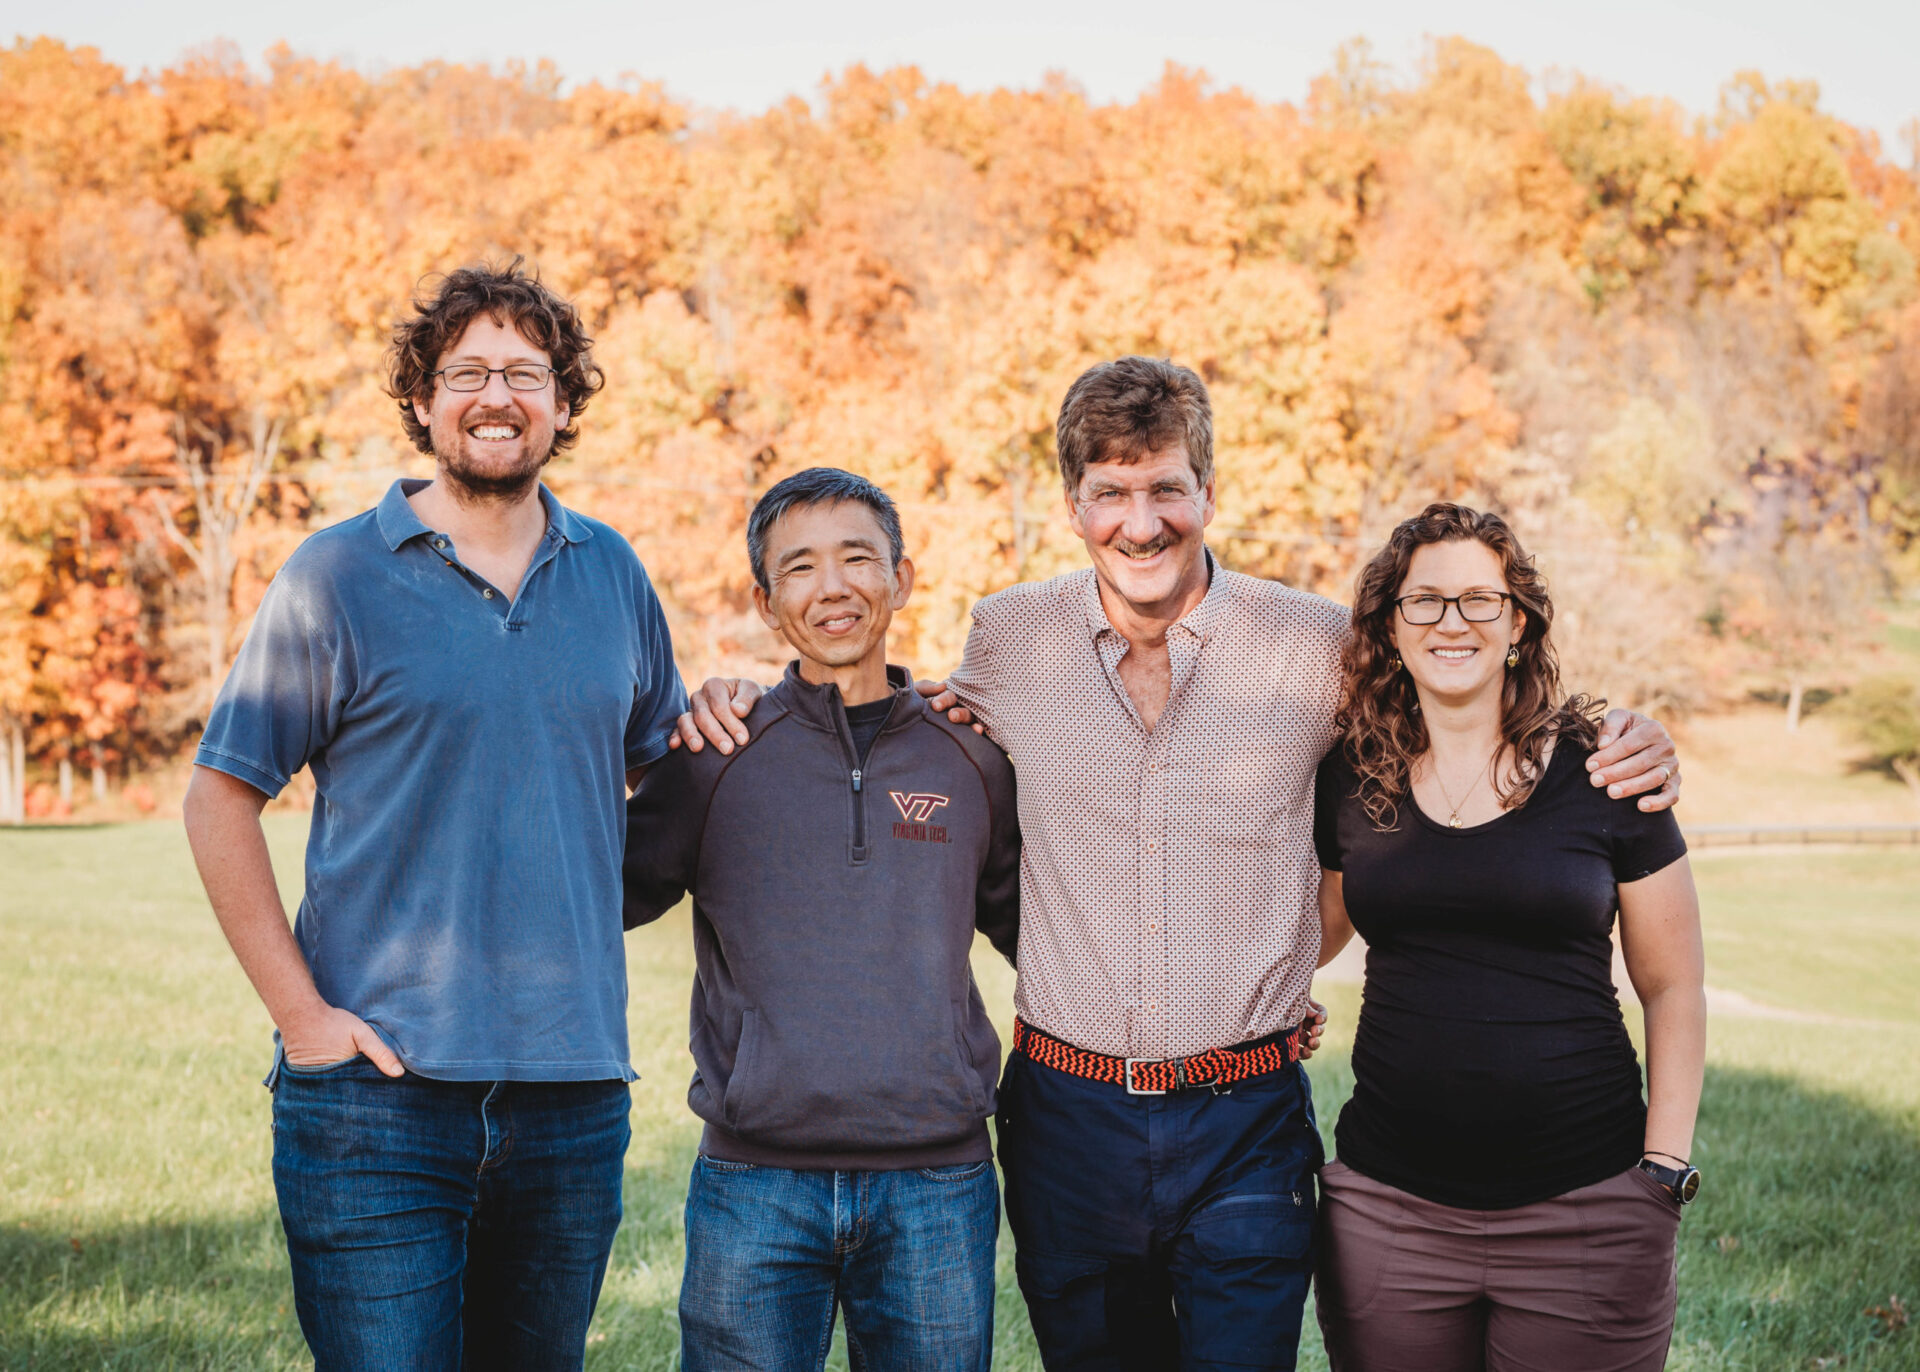 Tony Wolf and the Virginia Tech viticultural team, October 2021